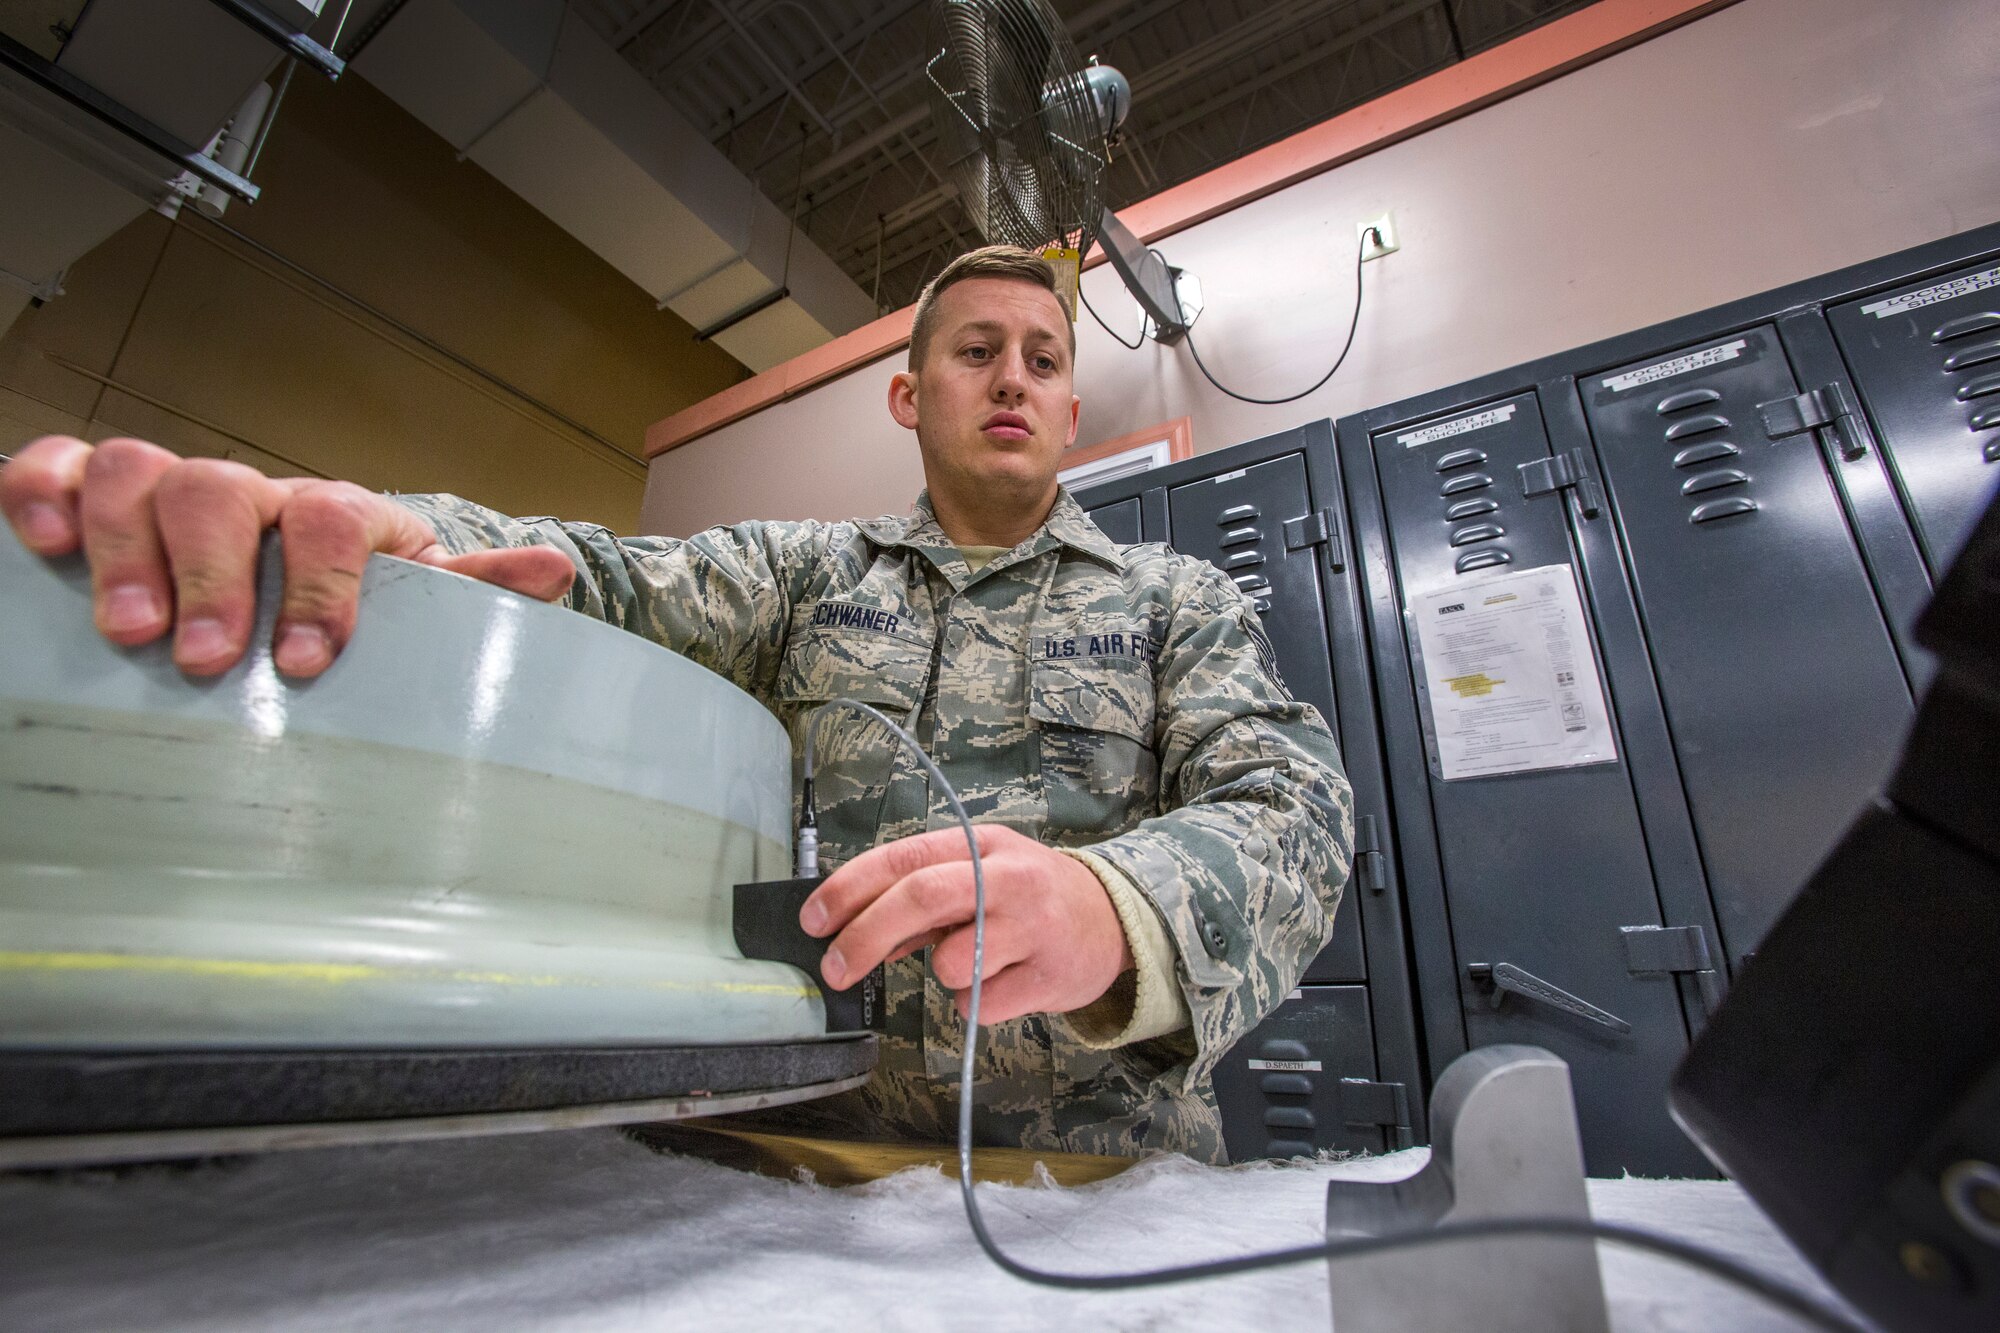 Staff Sgt. Dean C. Schwaner, non-destructive inspection craftsman, 108th Wing, performs an eddy current inspection on the nose landing gear wheel rims of the Wing’s KC-135R Stratotankers at Joint Base McGuire-Dix-Lakehurst, N.J., March 7, 2015. The New Jersey Air National Guard NDI Airmen provide support to the structural maintenance program, which ensures that the Stratotankers are mission-ready. (U.S. Air National Guard photo by Master Sgt. Mark C. Olsen/Released)